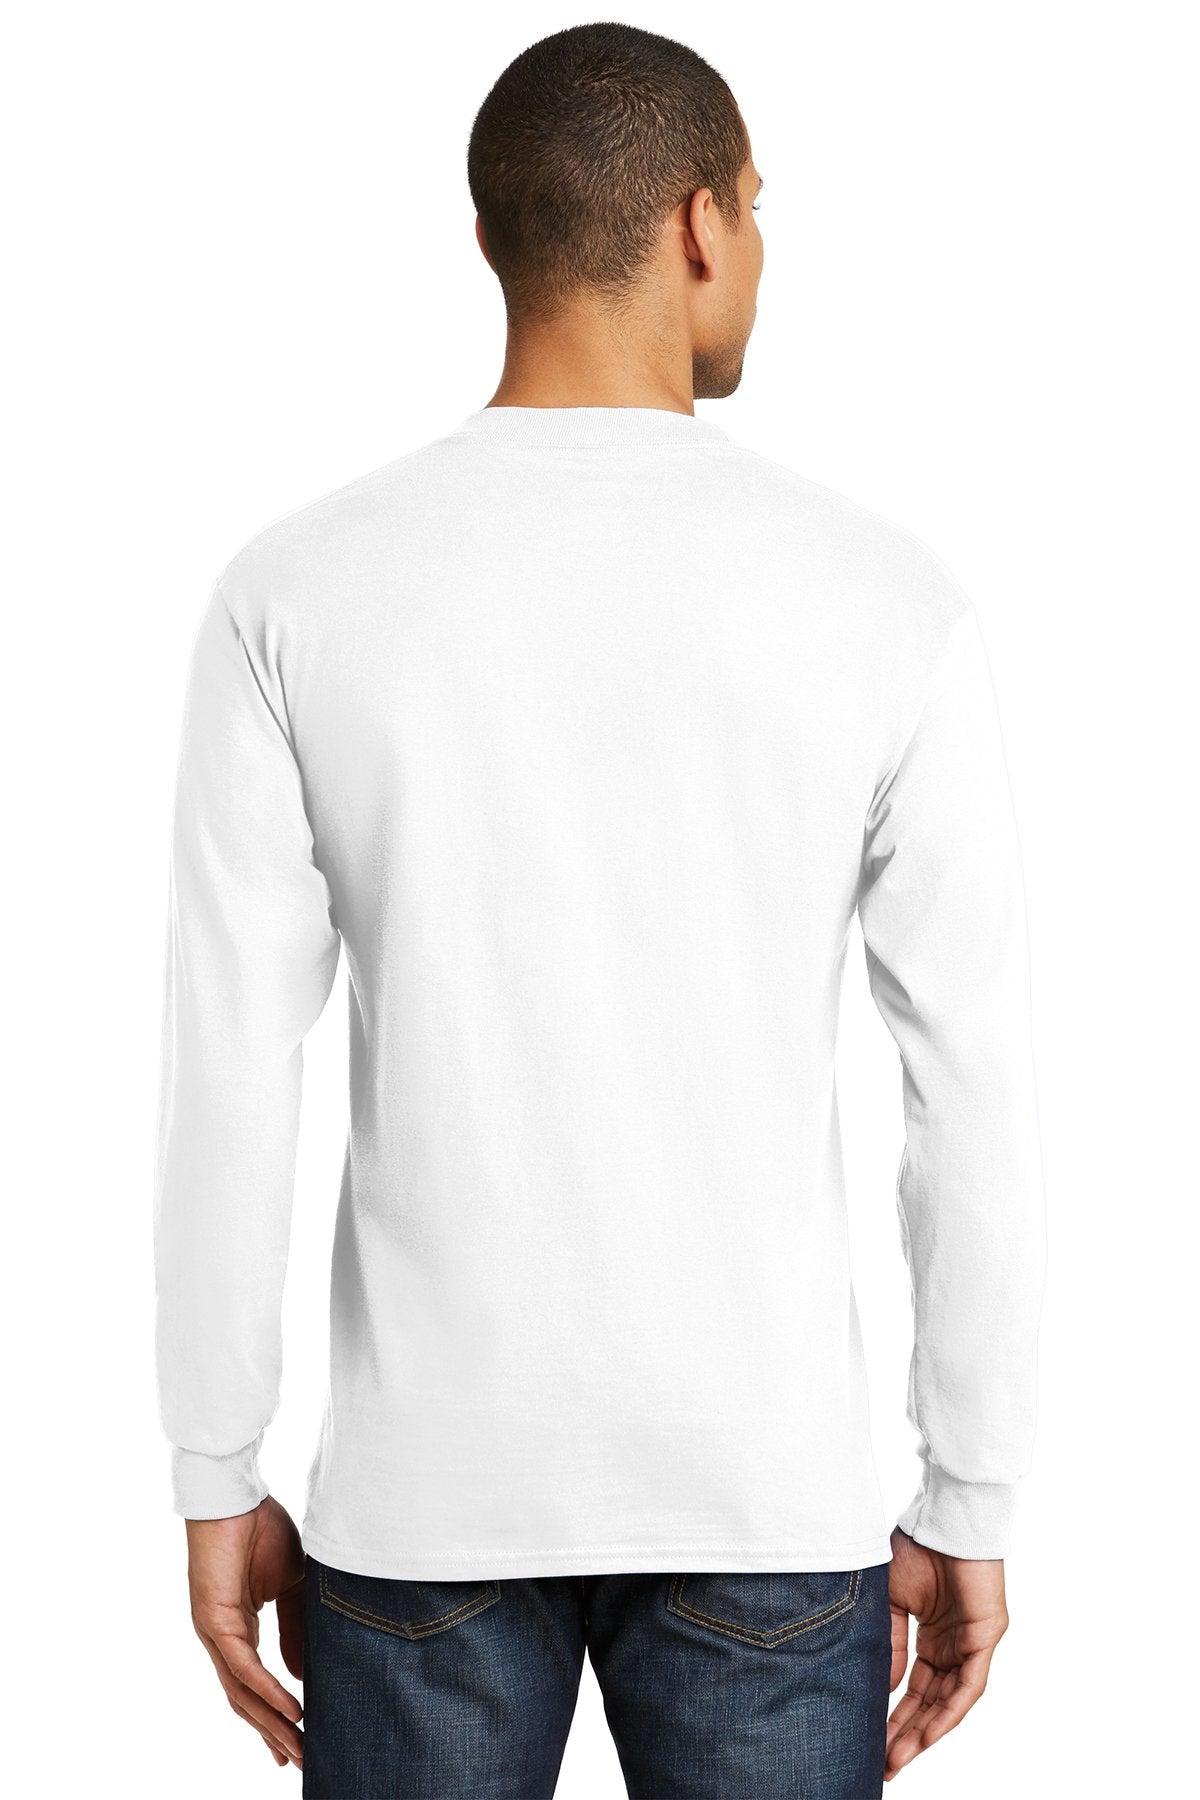 hanes beefy t cotton long sleeve t shirt 5186 white